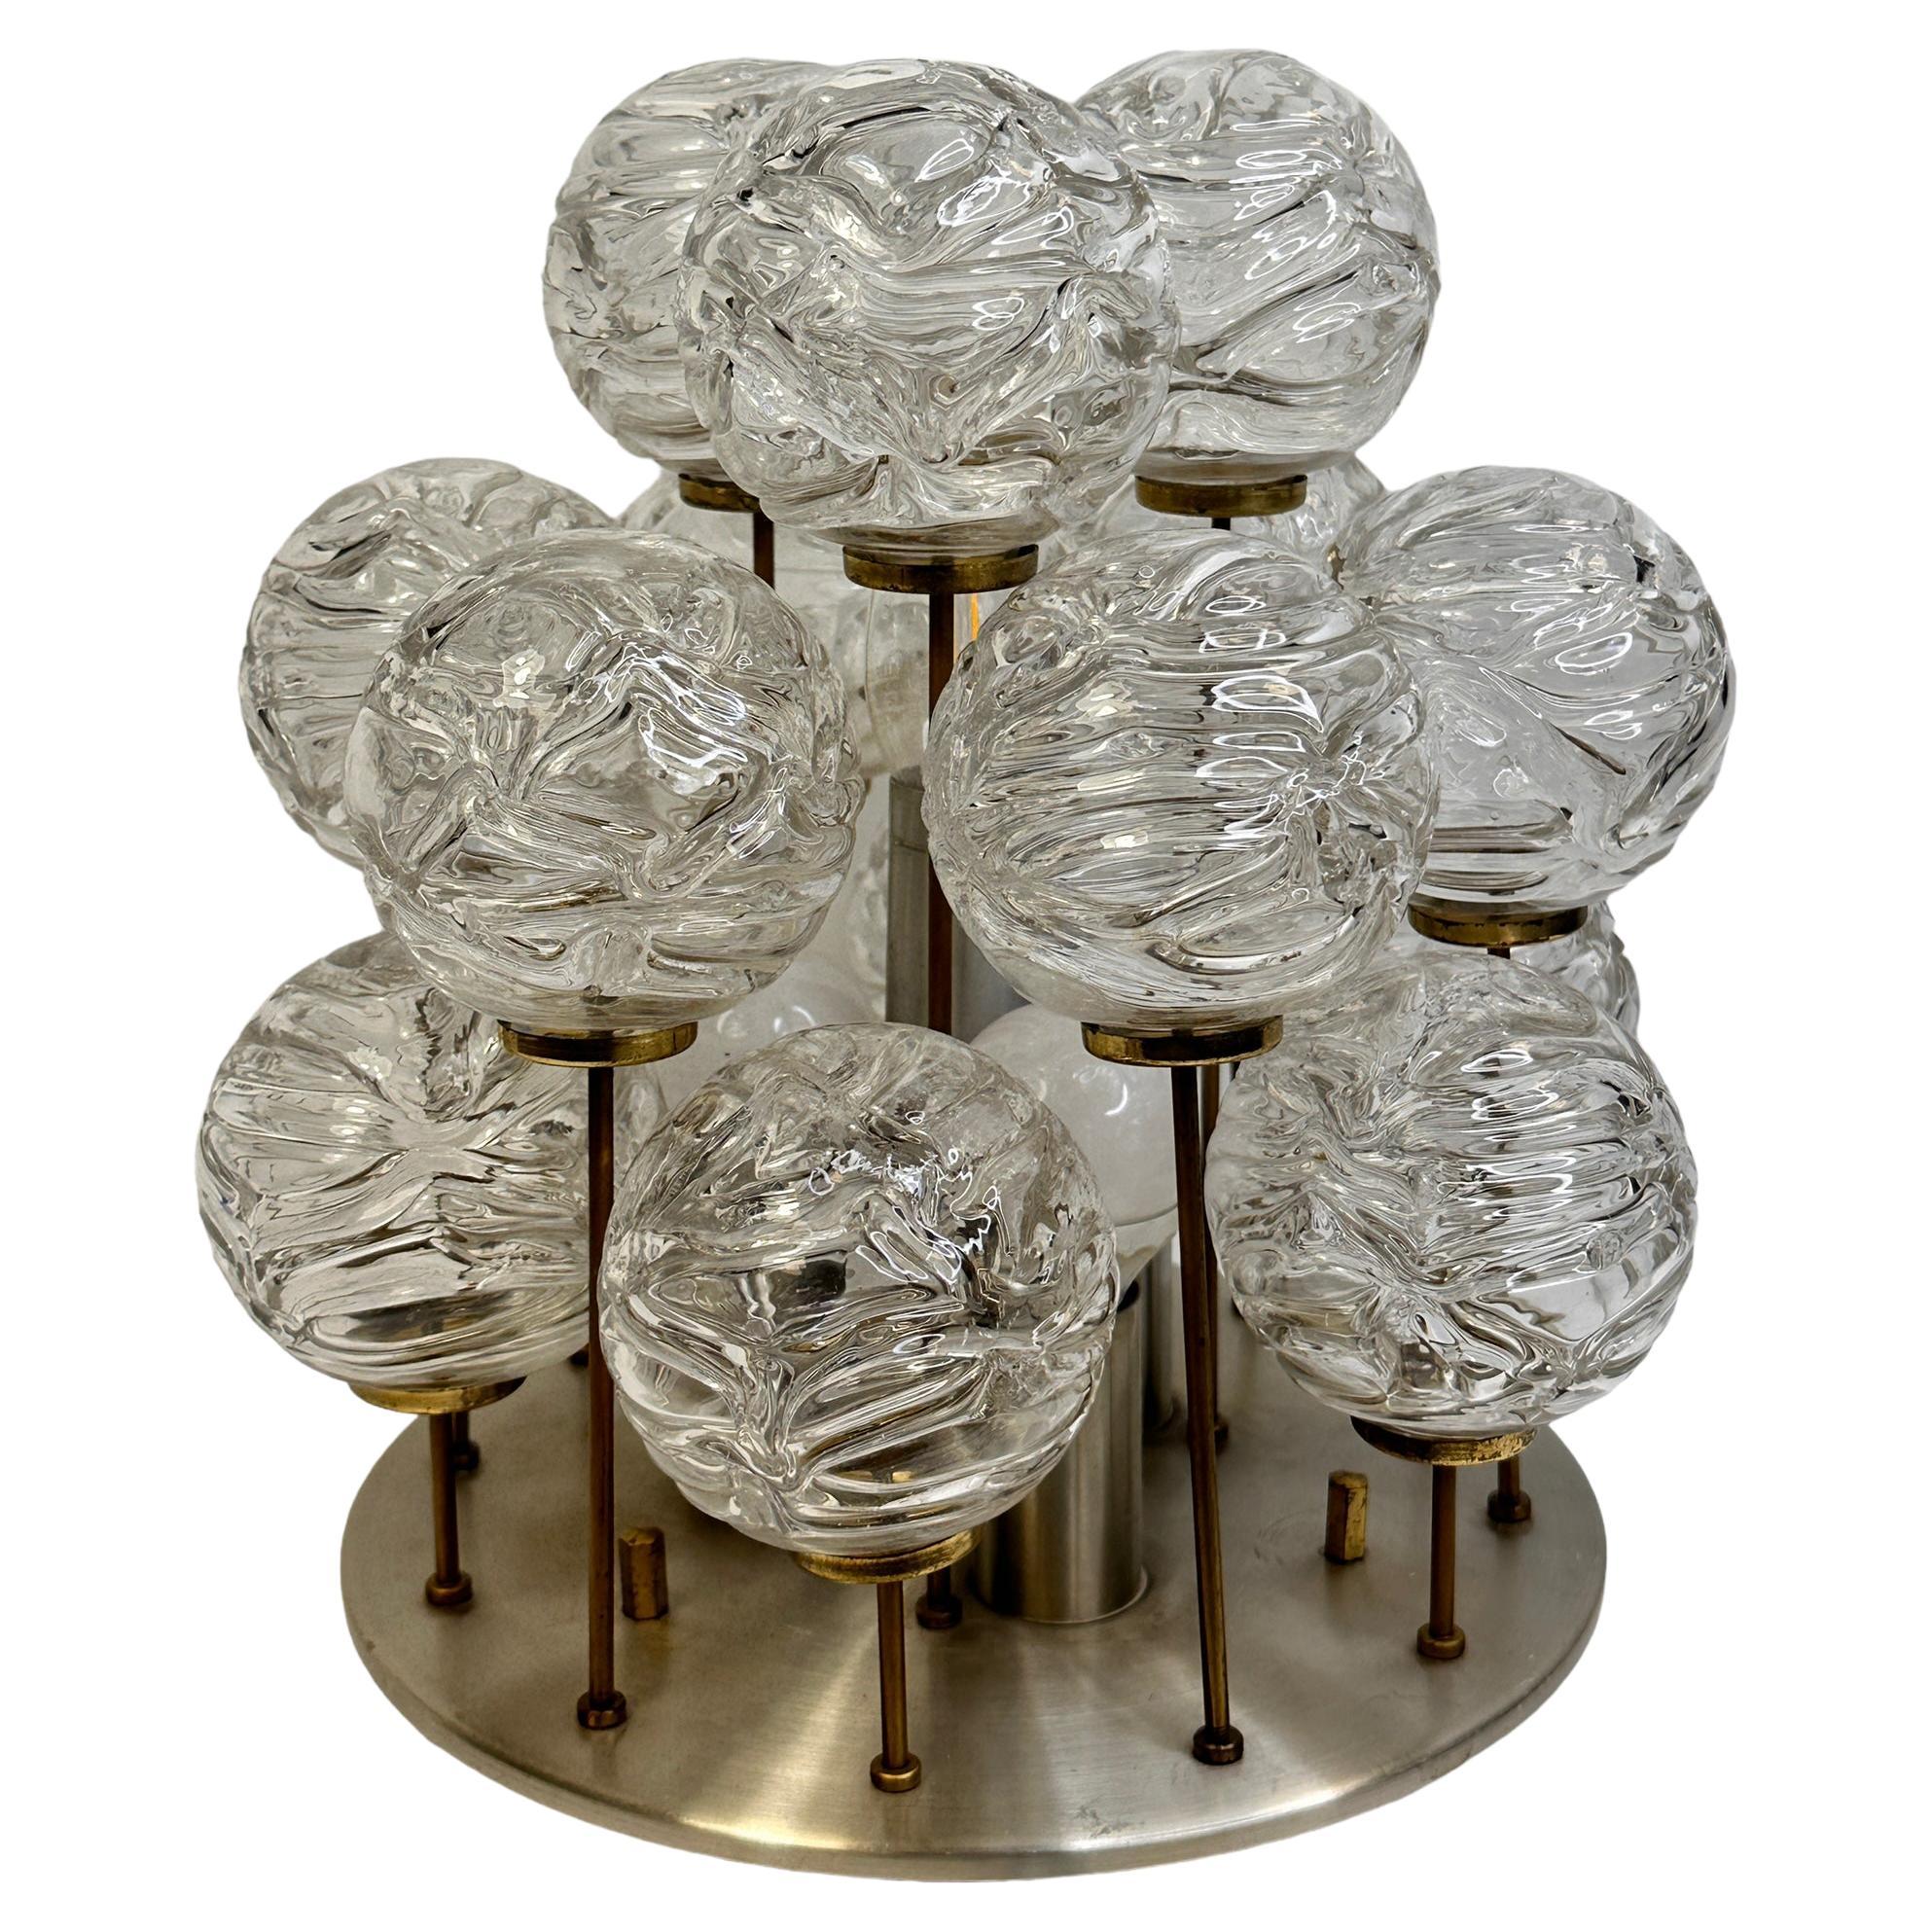 Swirled glass ball flush mount fixture by Doria Leuchten, Germany. The handblown glass ball elements are attached to brass rods in varying lengths that when illuminated by the single light source makes a beautiful light. The Fixture requires four